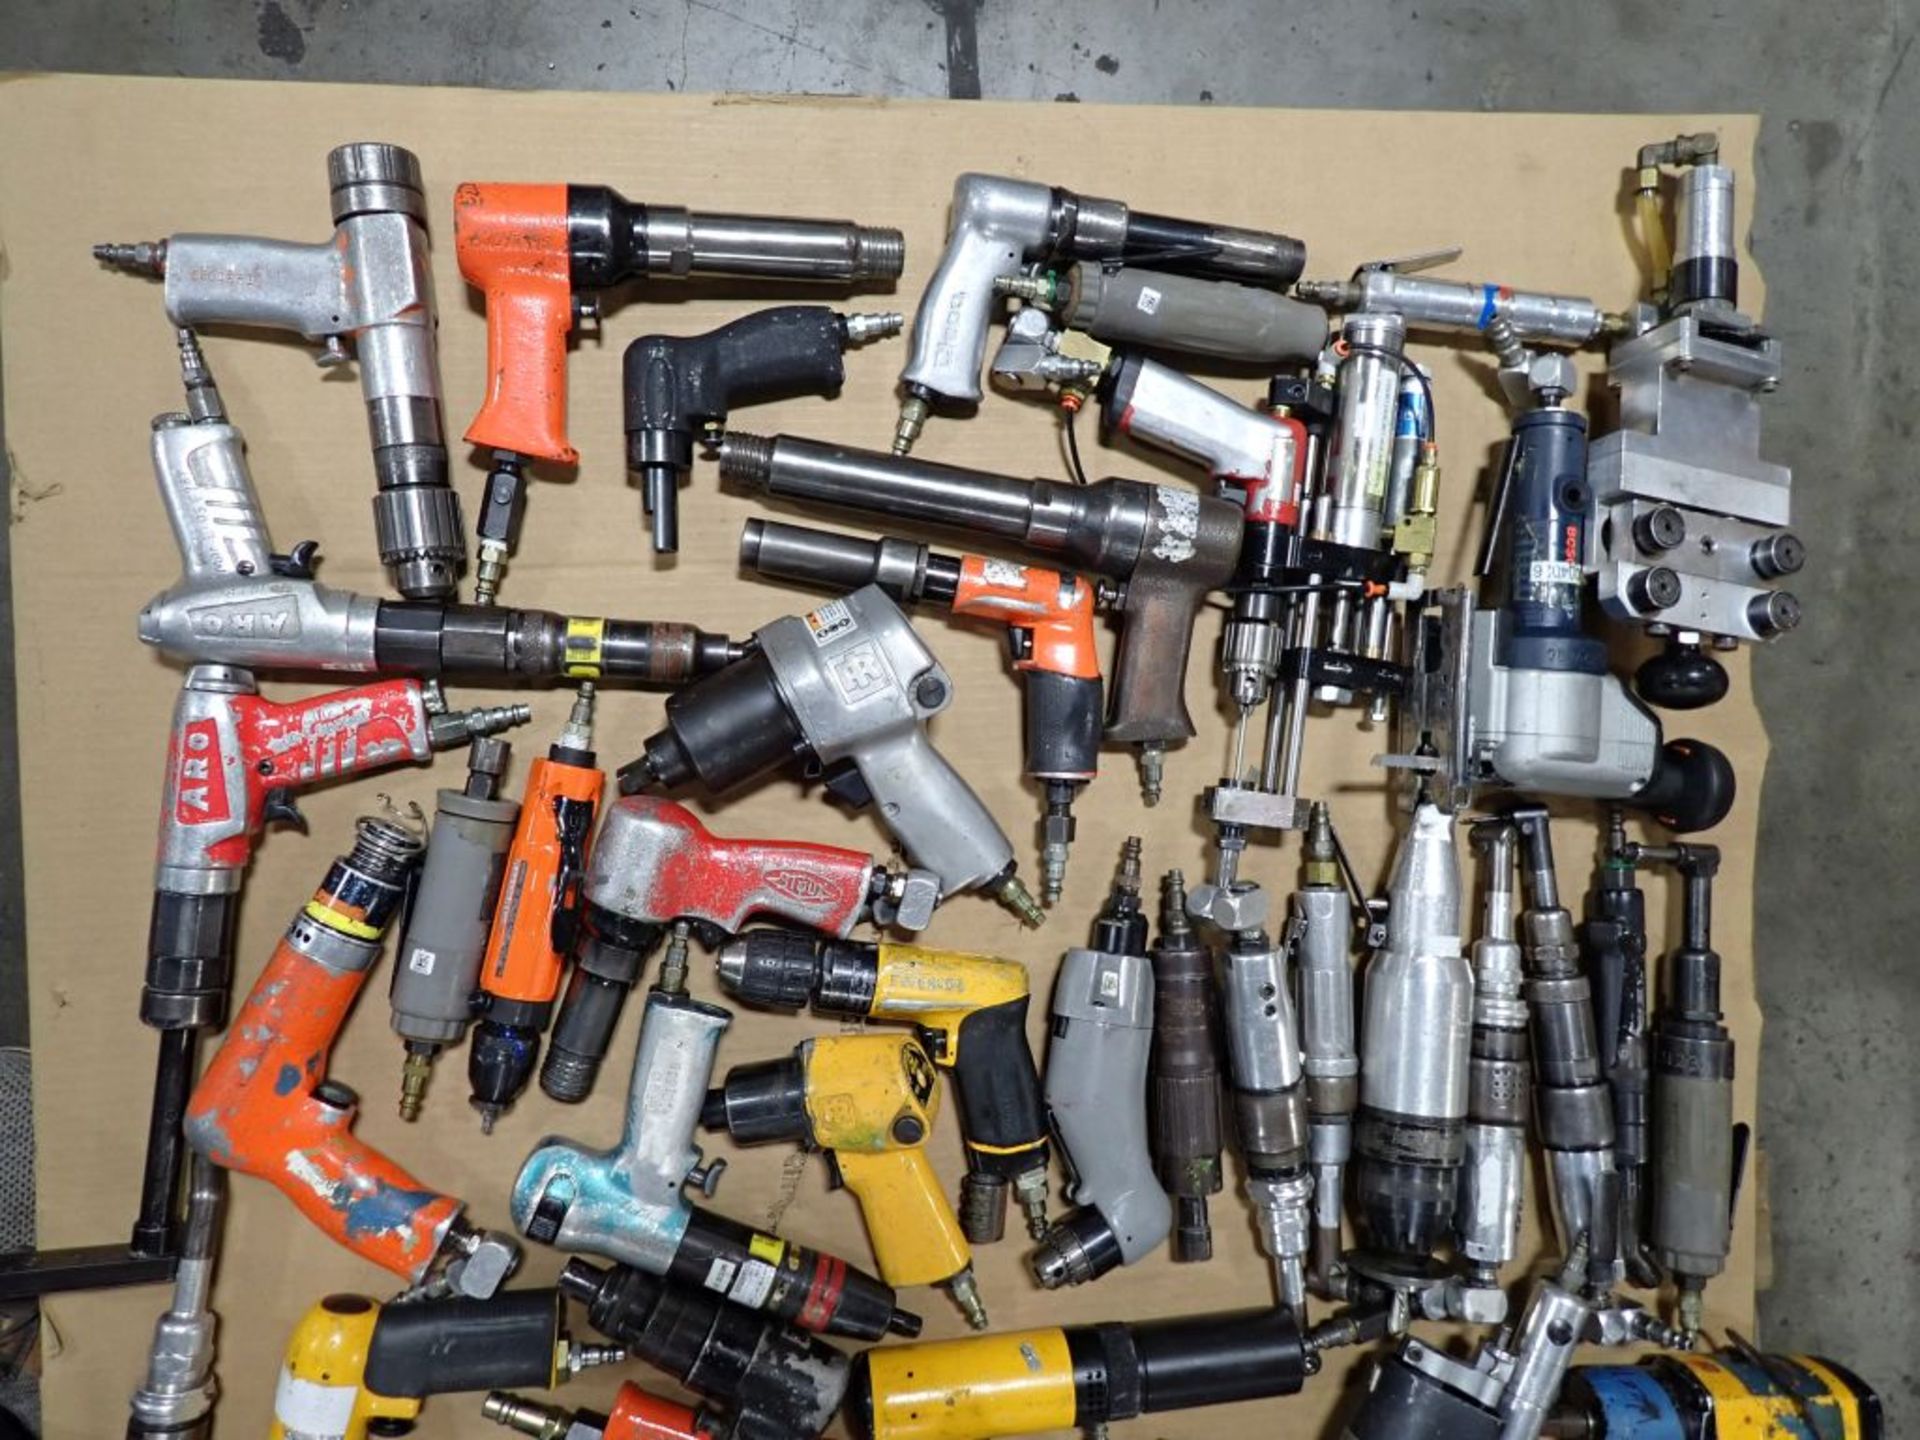 Lot of Pneumatic Tools | Tag: 241516 | Limited Forklift Assistance Available - $10.00 Lot Loading - Image 3 of 3